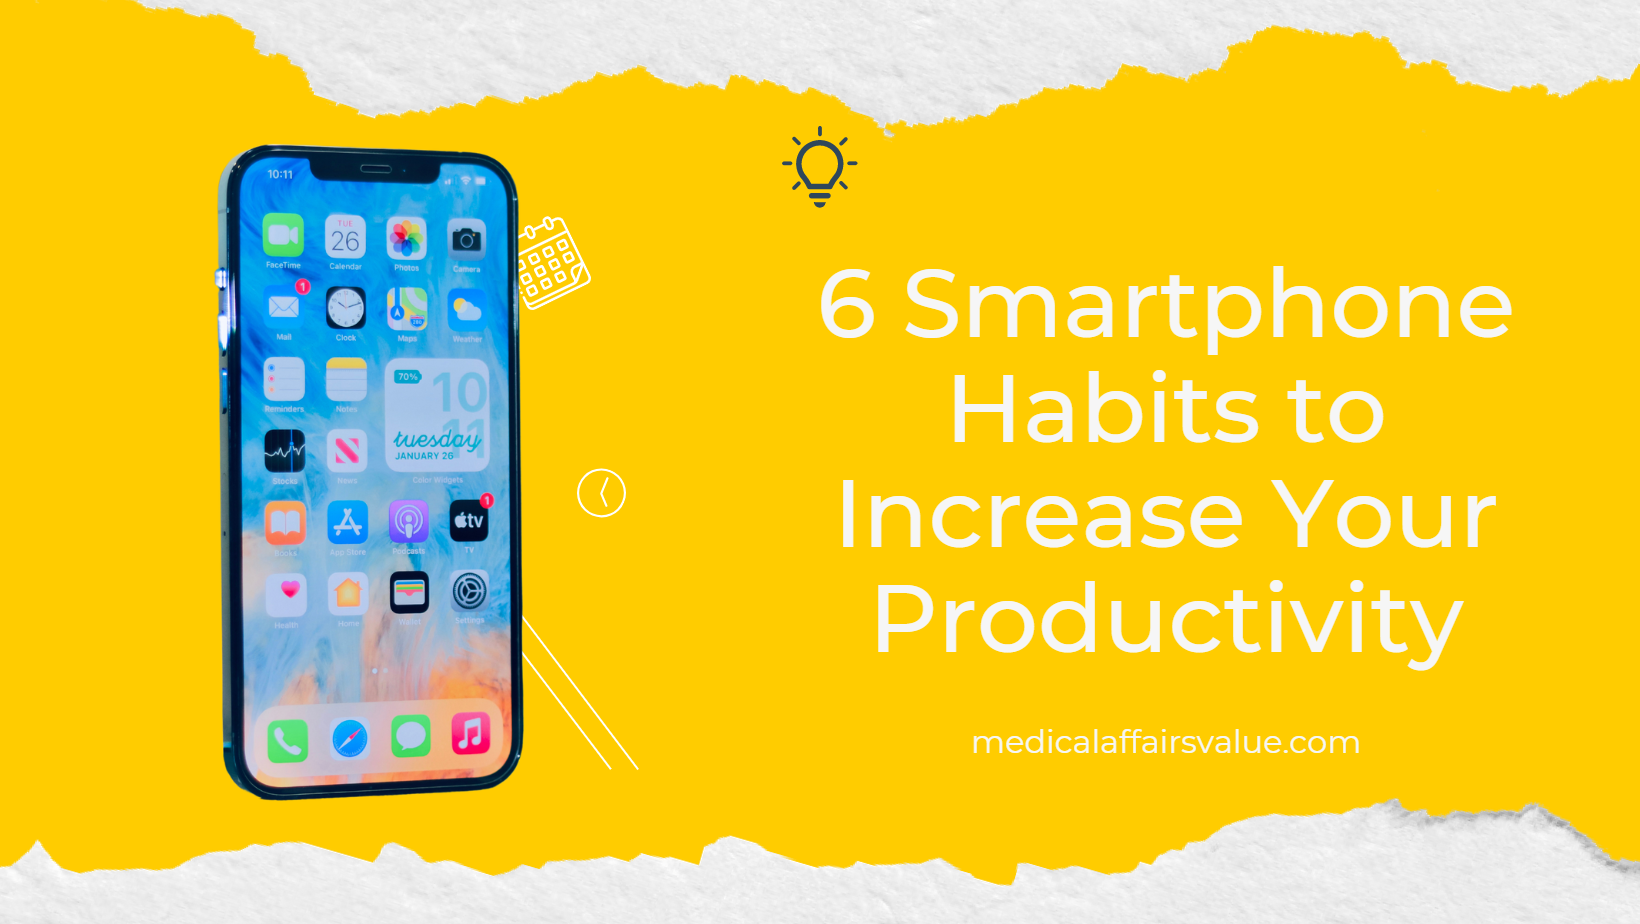 6 Smartphone habits to increase your productivity blog banner